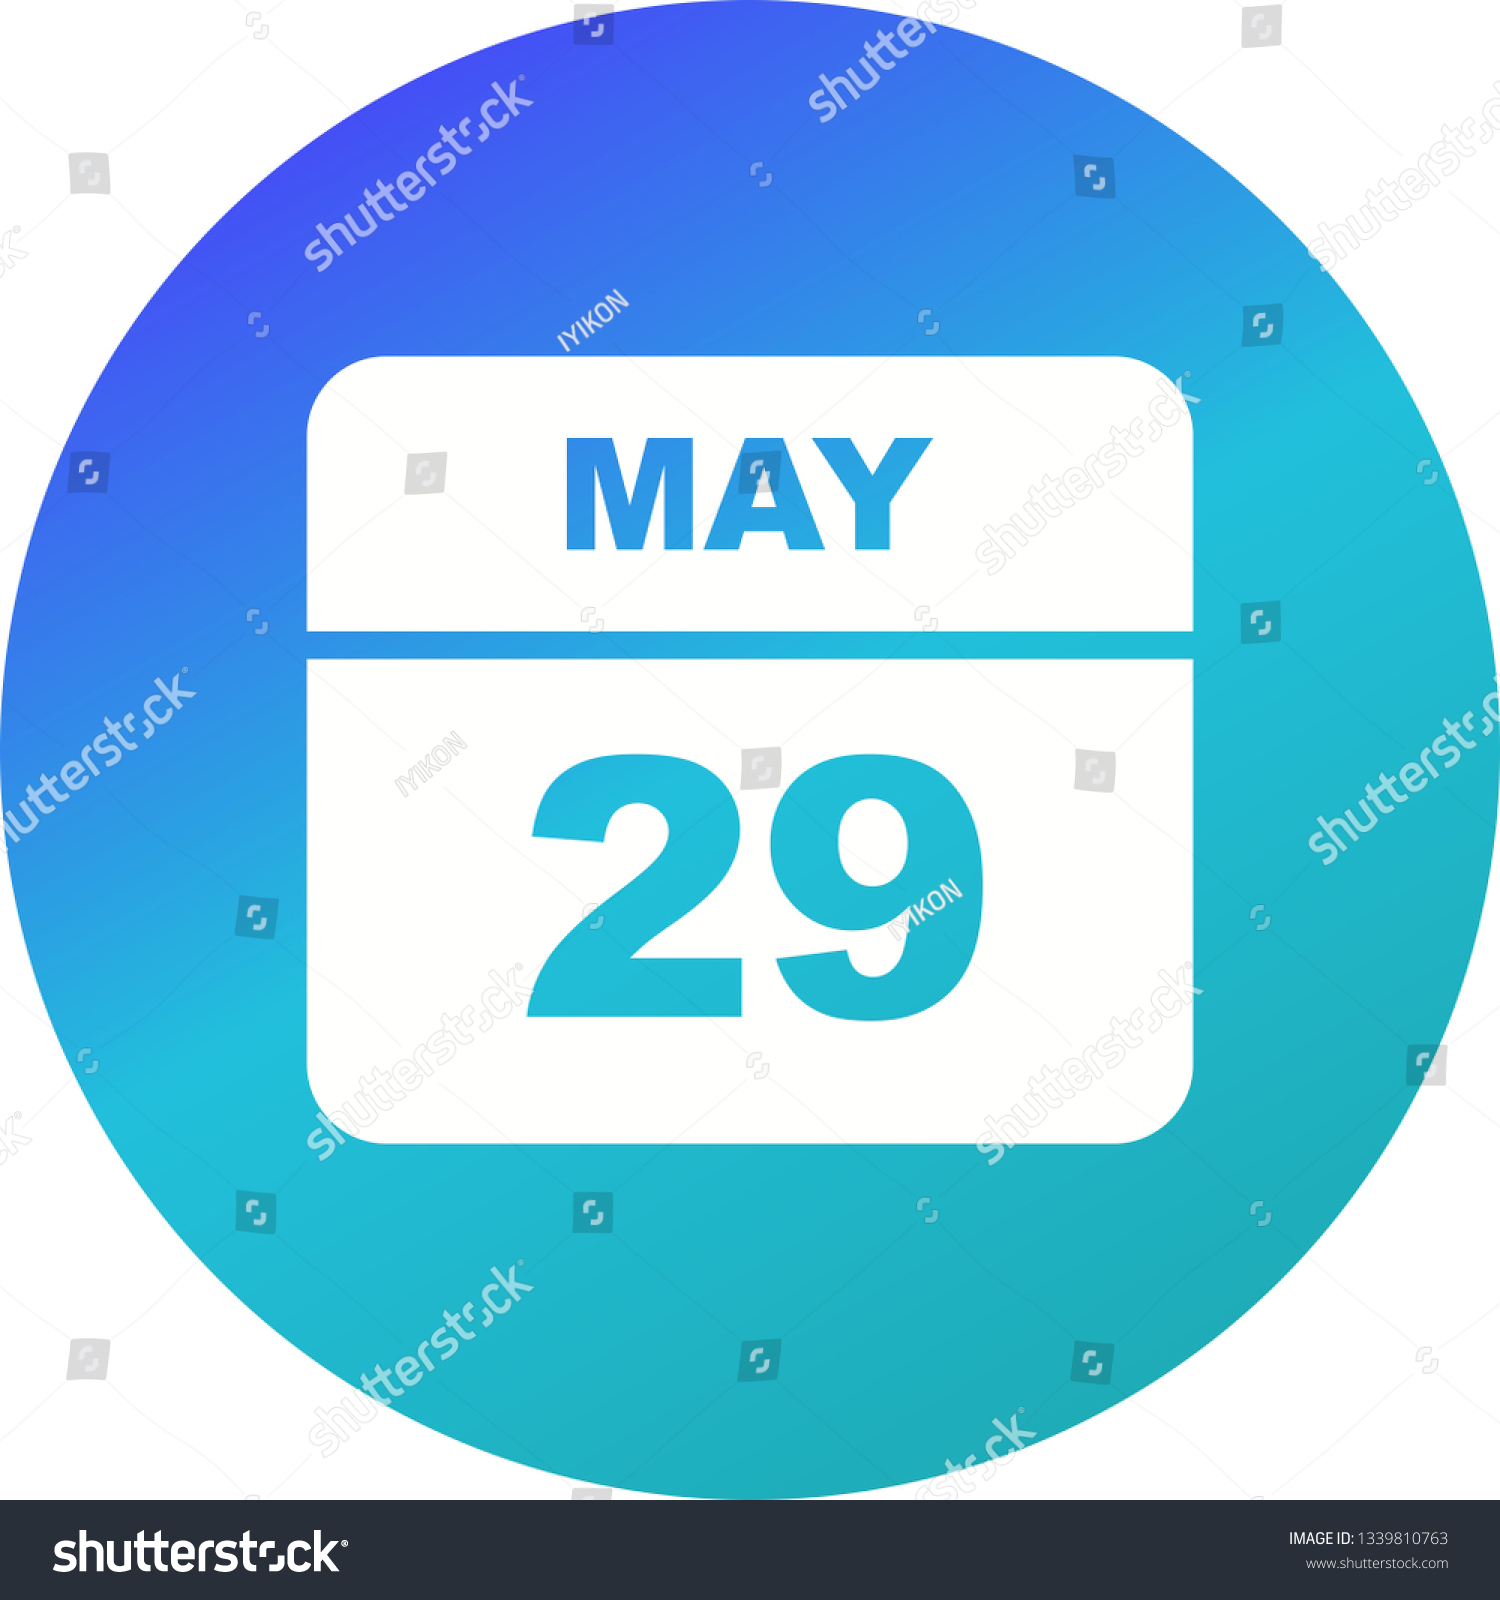 May 29th Date on a Single Day Calendar Royalty Free Stock Photo